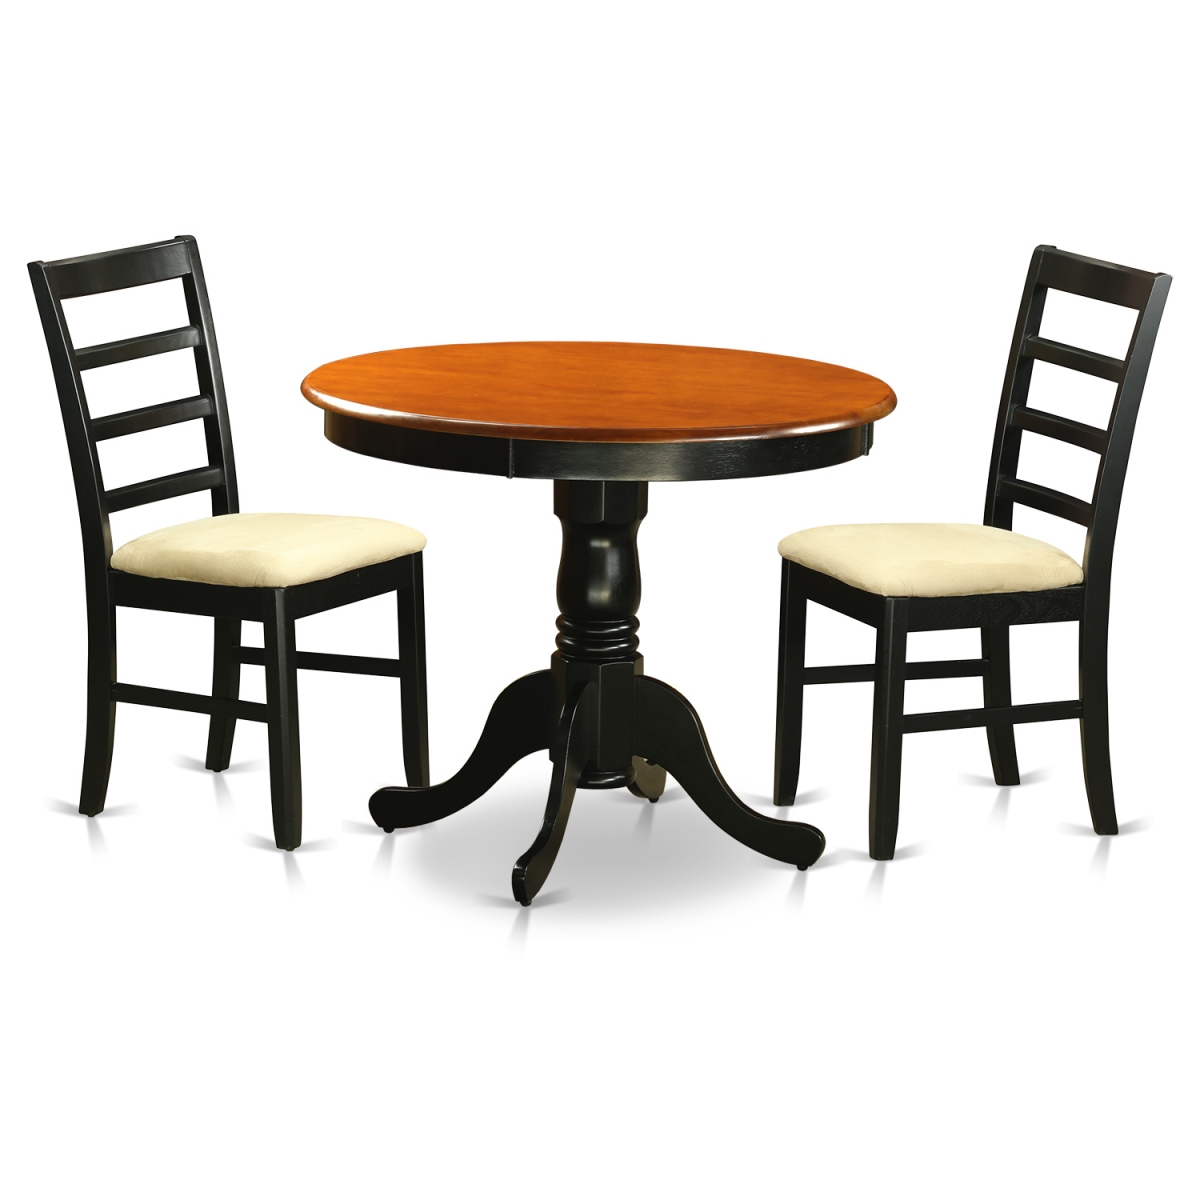 Picture of East West Furniture ANPF3-BLK-C Dining Furniture Set with 2 Microfiber Chairs, Black & Cherry - 3 Piece